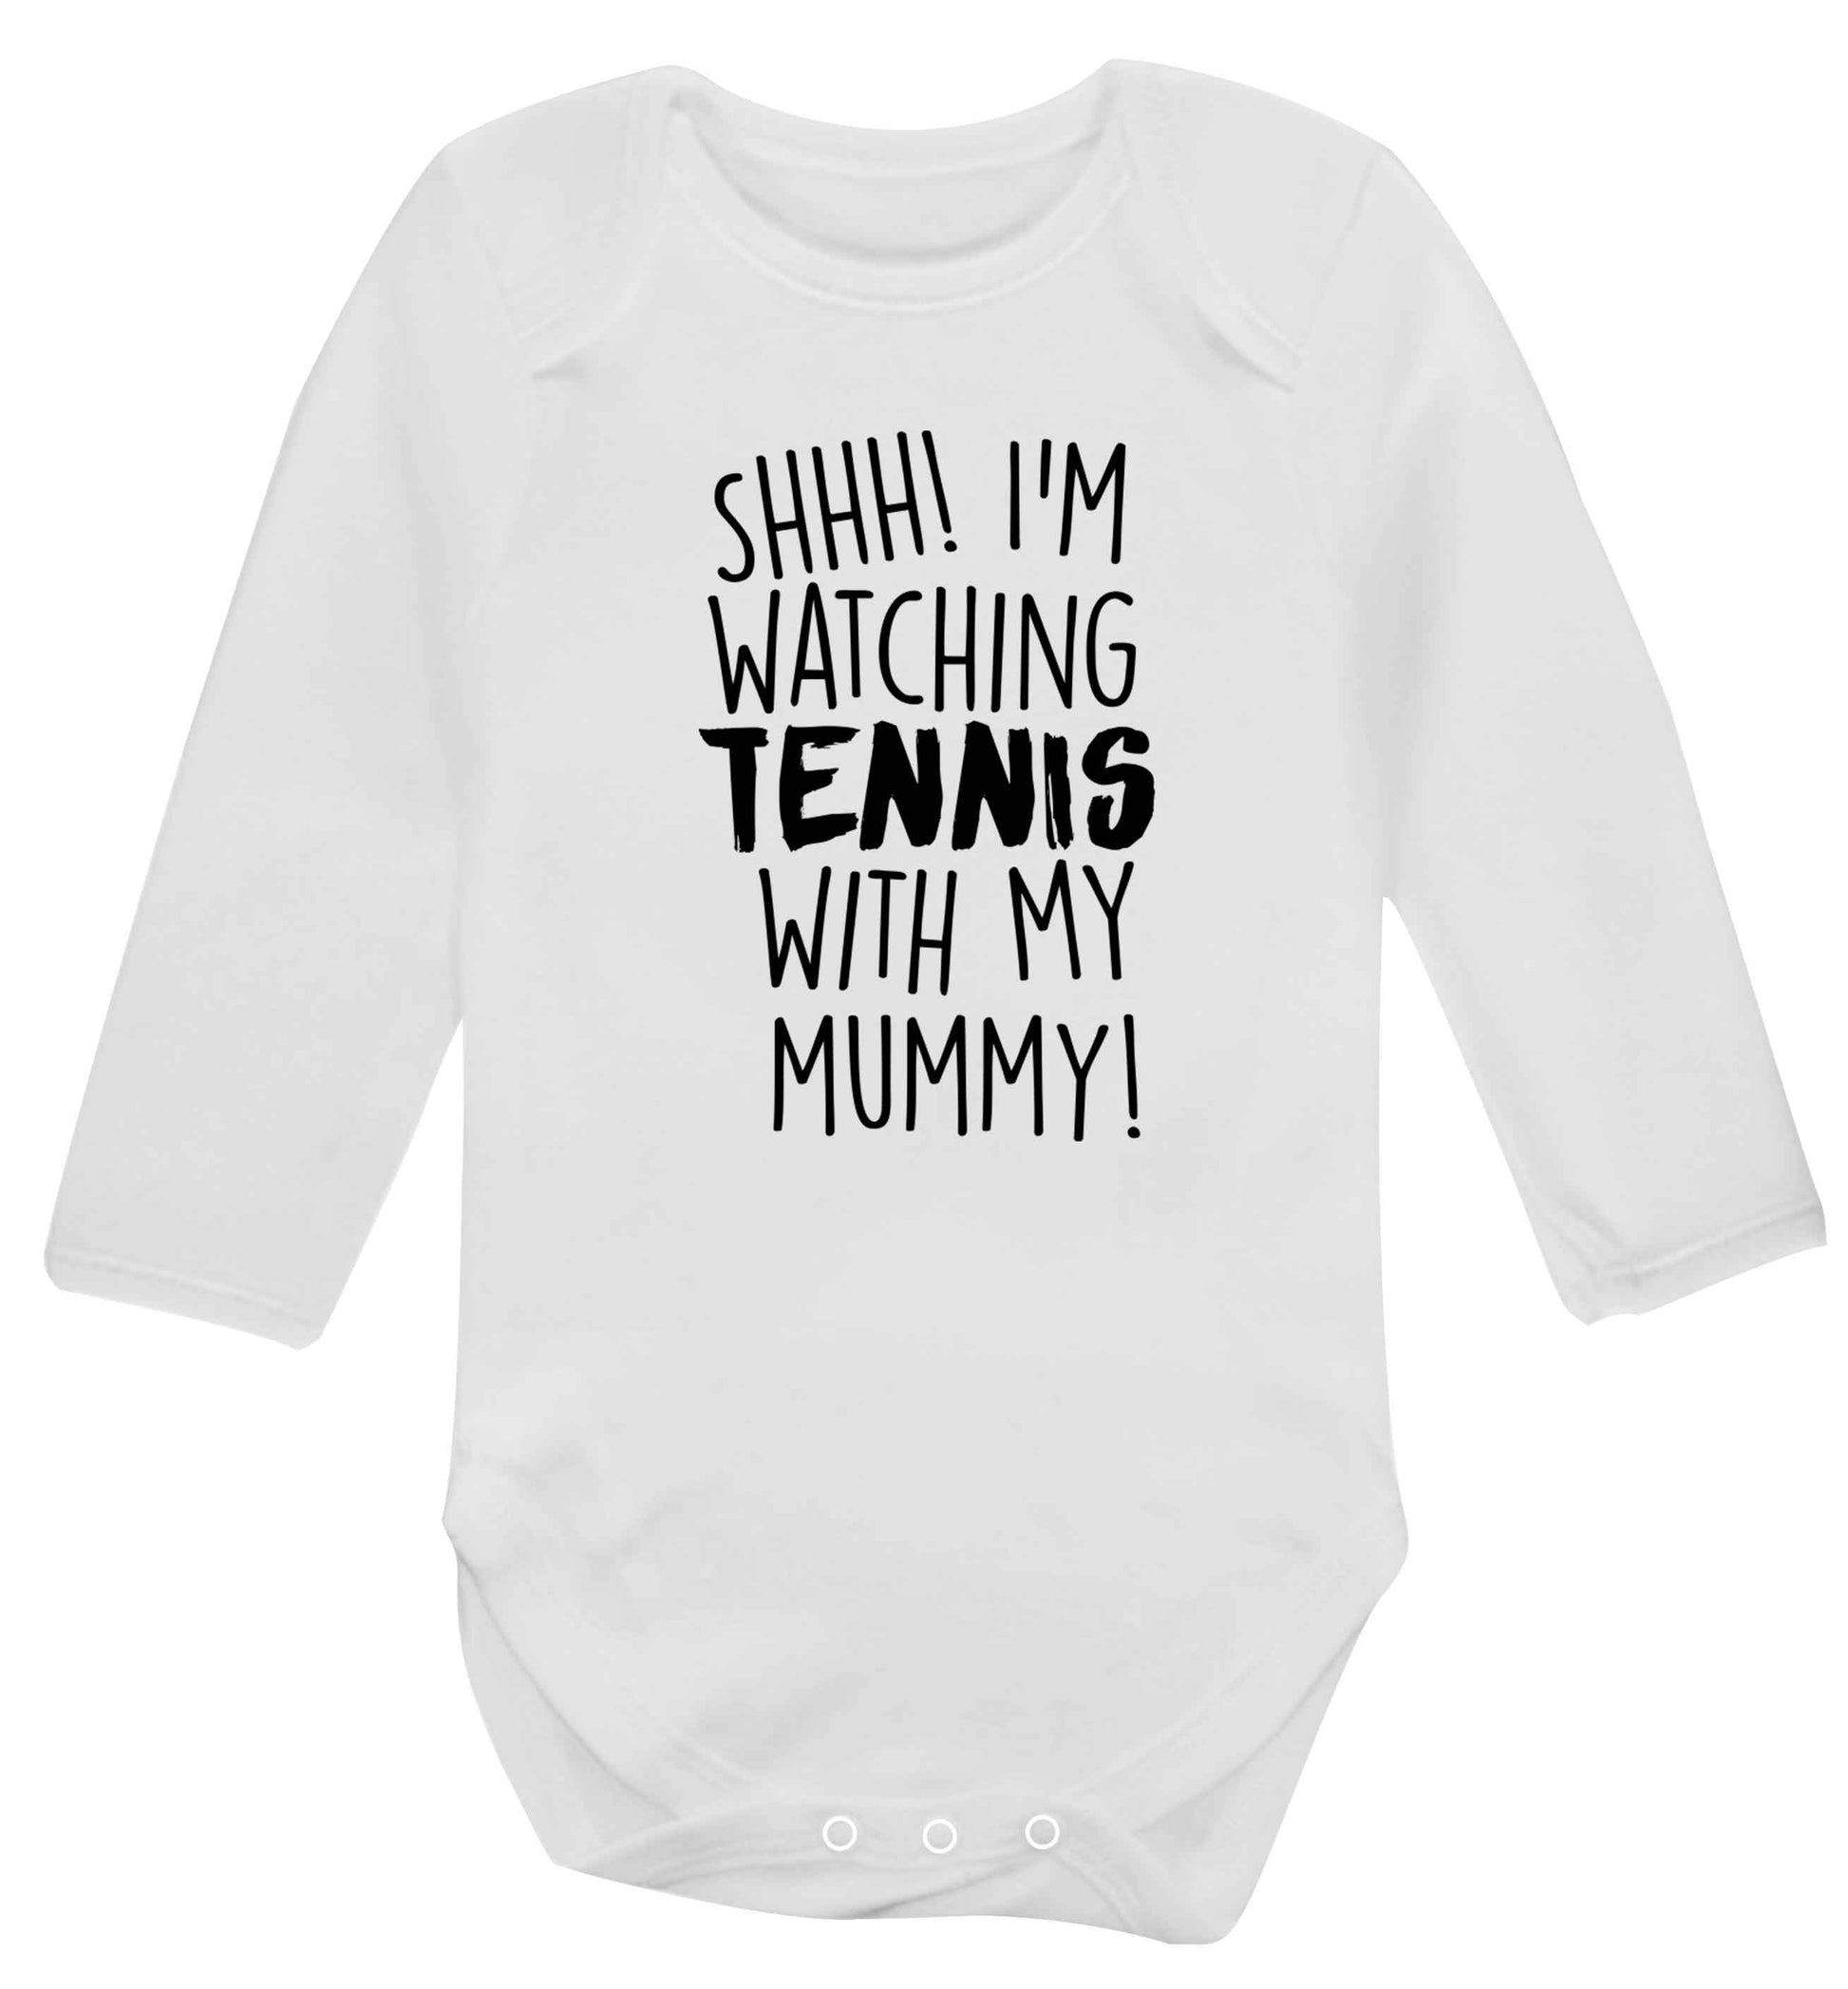 Shh! I'm watching tennis with my mummy! Baby Vest long sleeved white 6-12 months